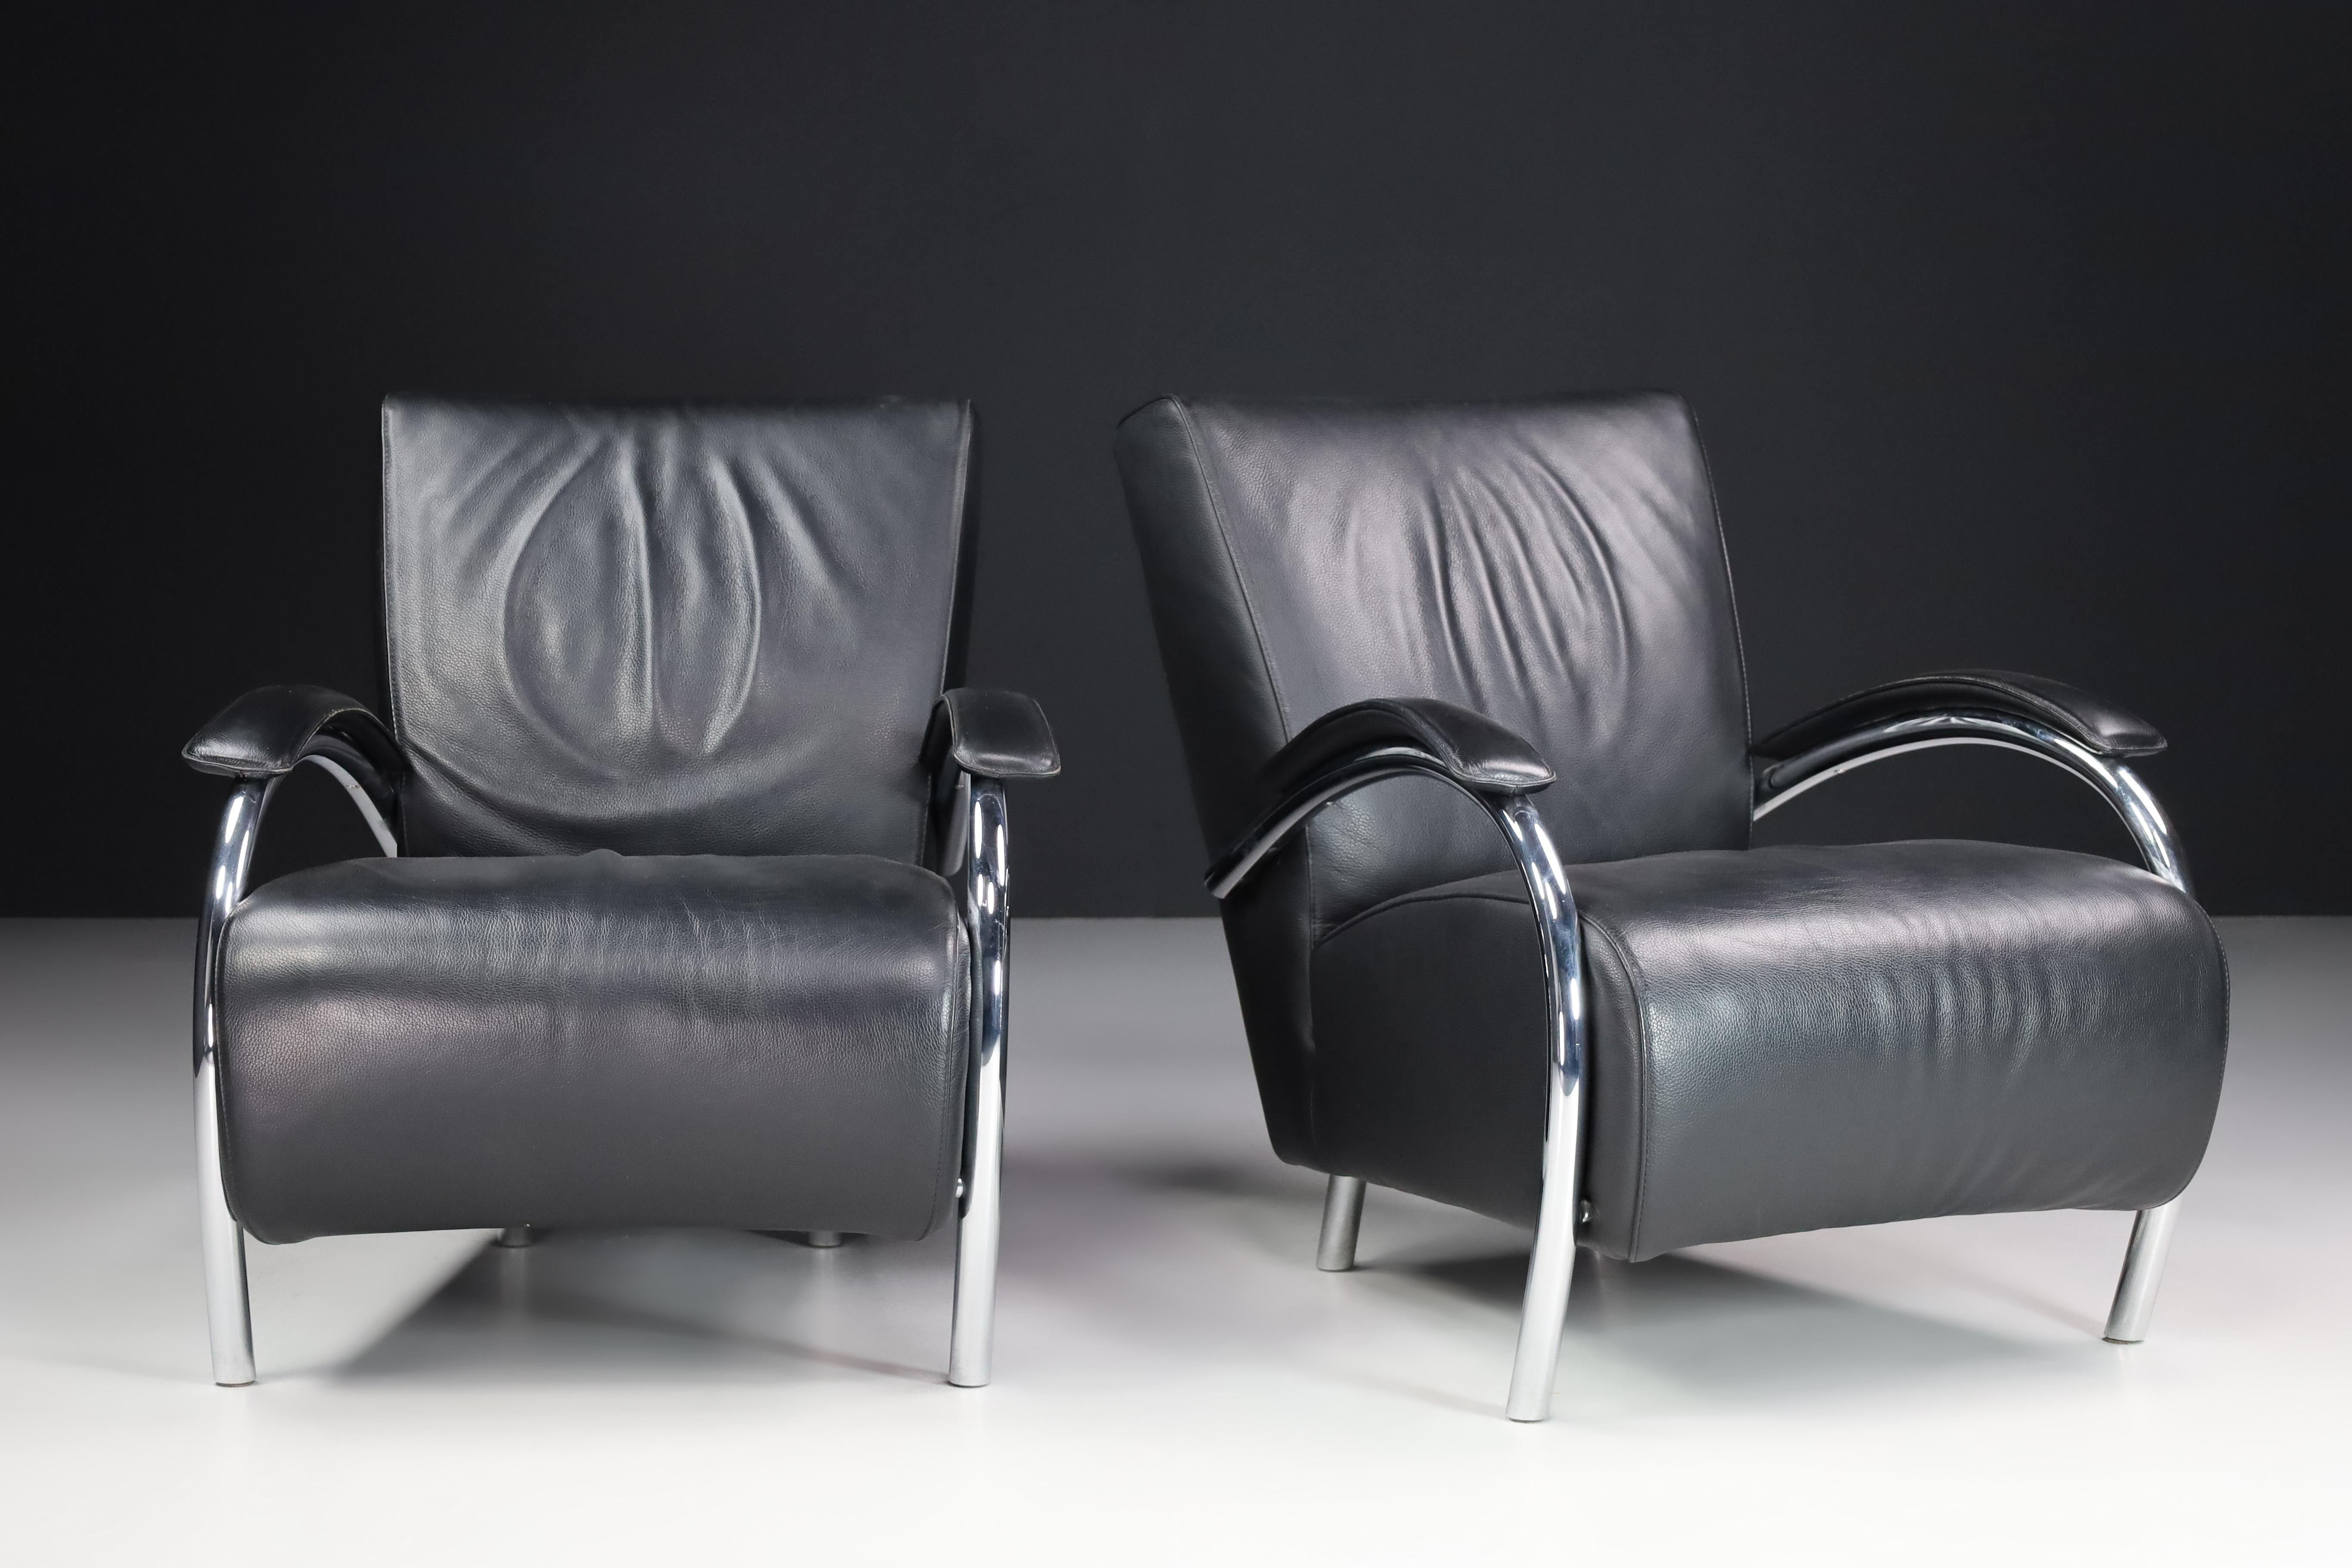 Leather and Chrome Lounge chairs For Molinari, Italy 1980s

These armchairs were designed and produced in the 80s by the Italian furniture manufacturer Molinari, known for its handmade quality furniture. The armchairs are upholstered with thick,